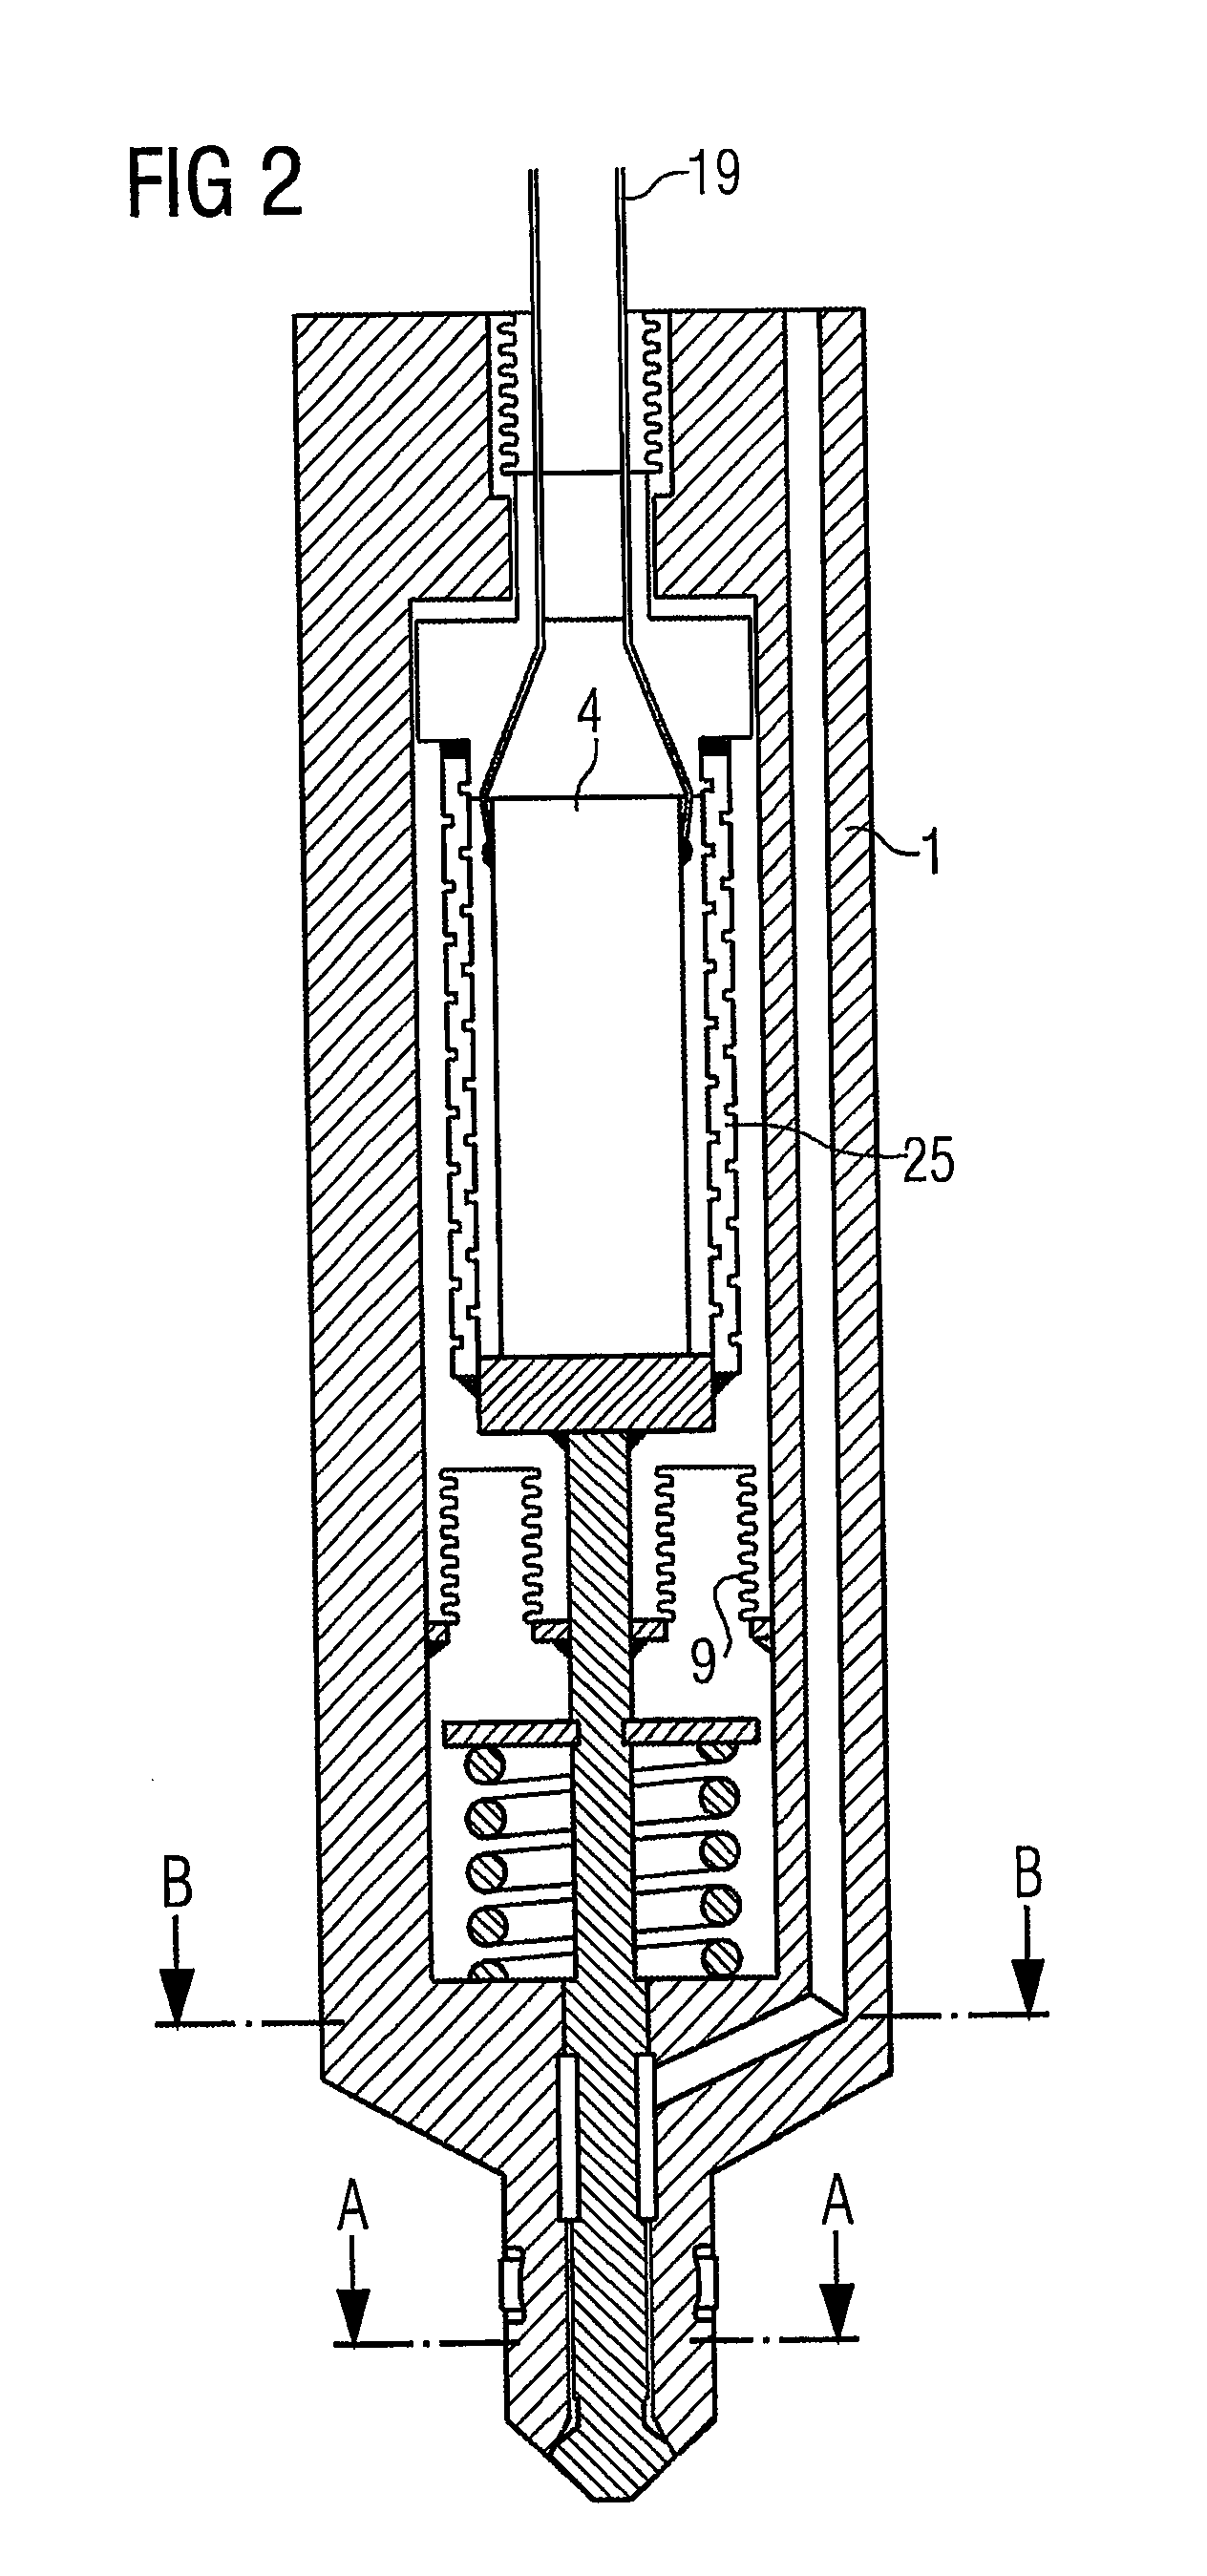 Dosing device for fluids, especially a motor vehicle injection valve